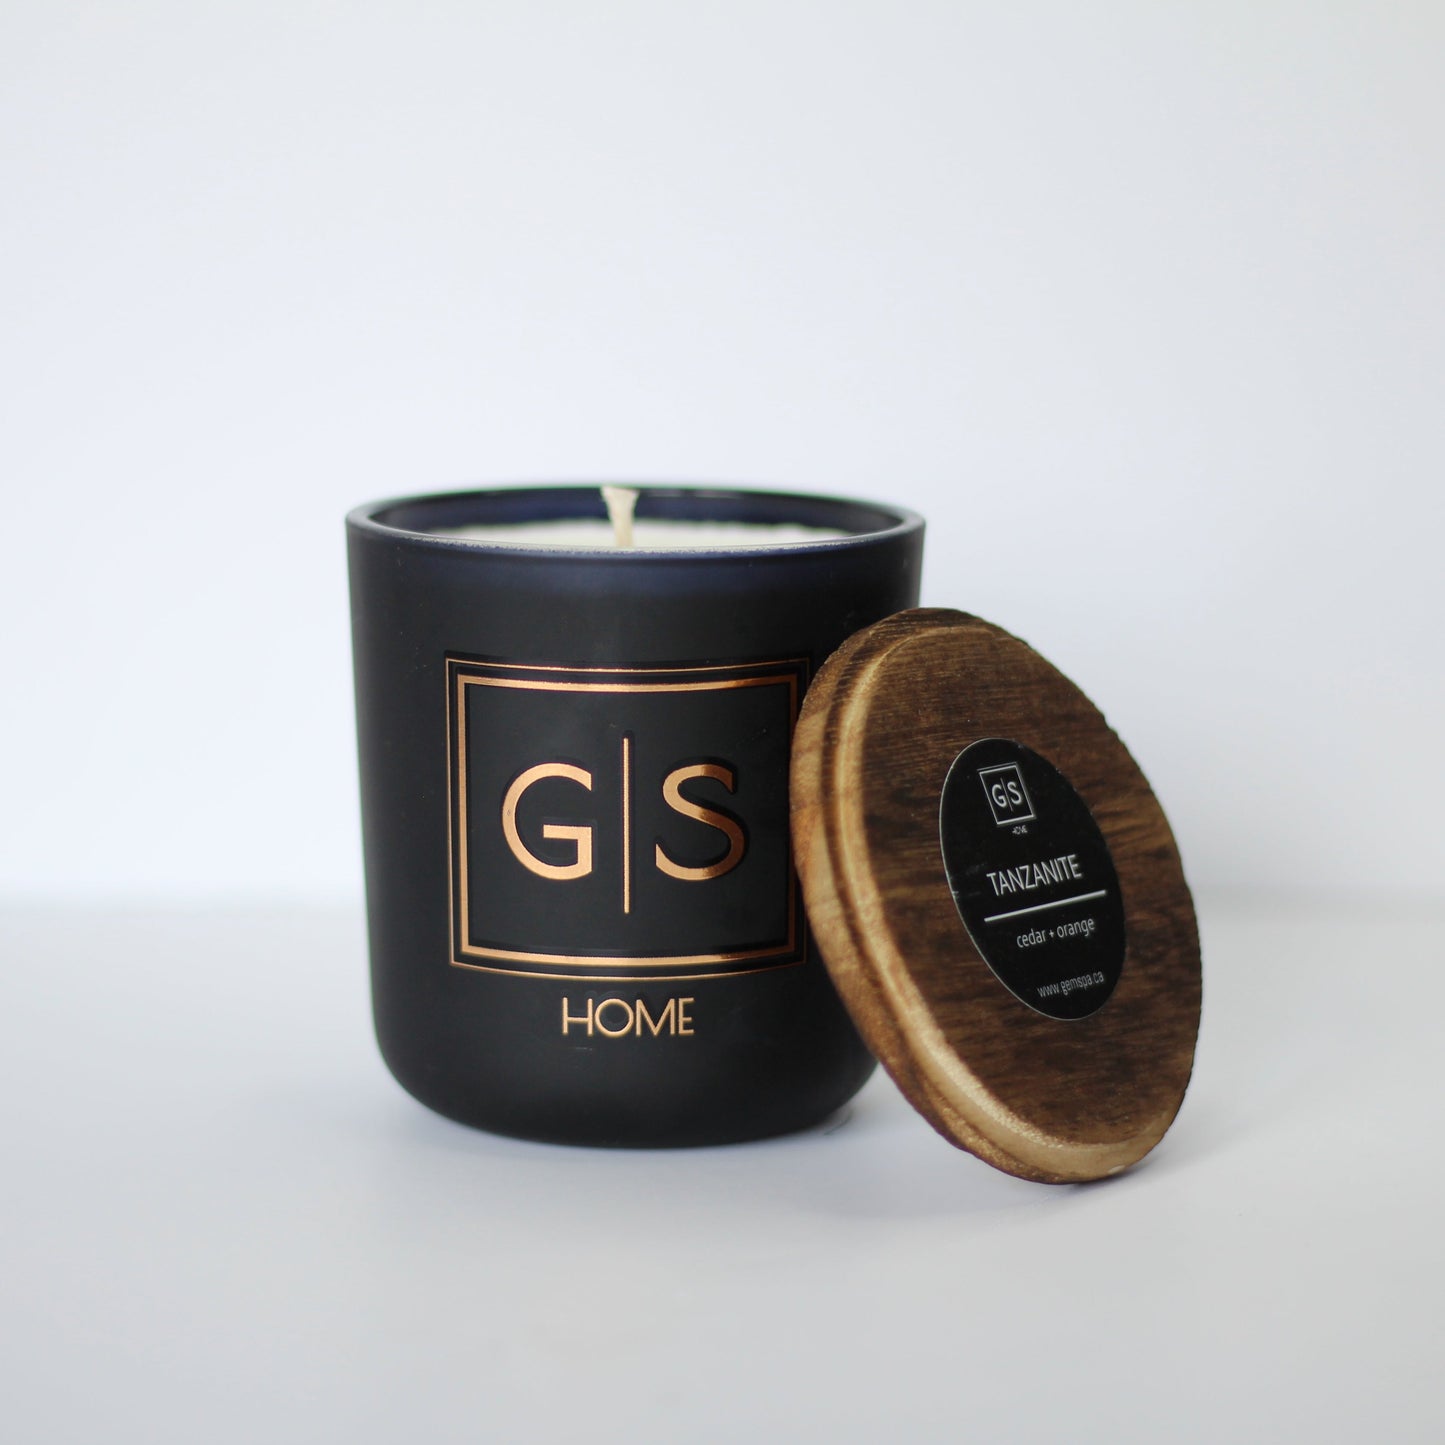 TANZANITE G|S Home Soy Candle